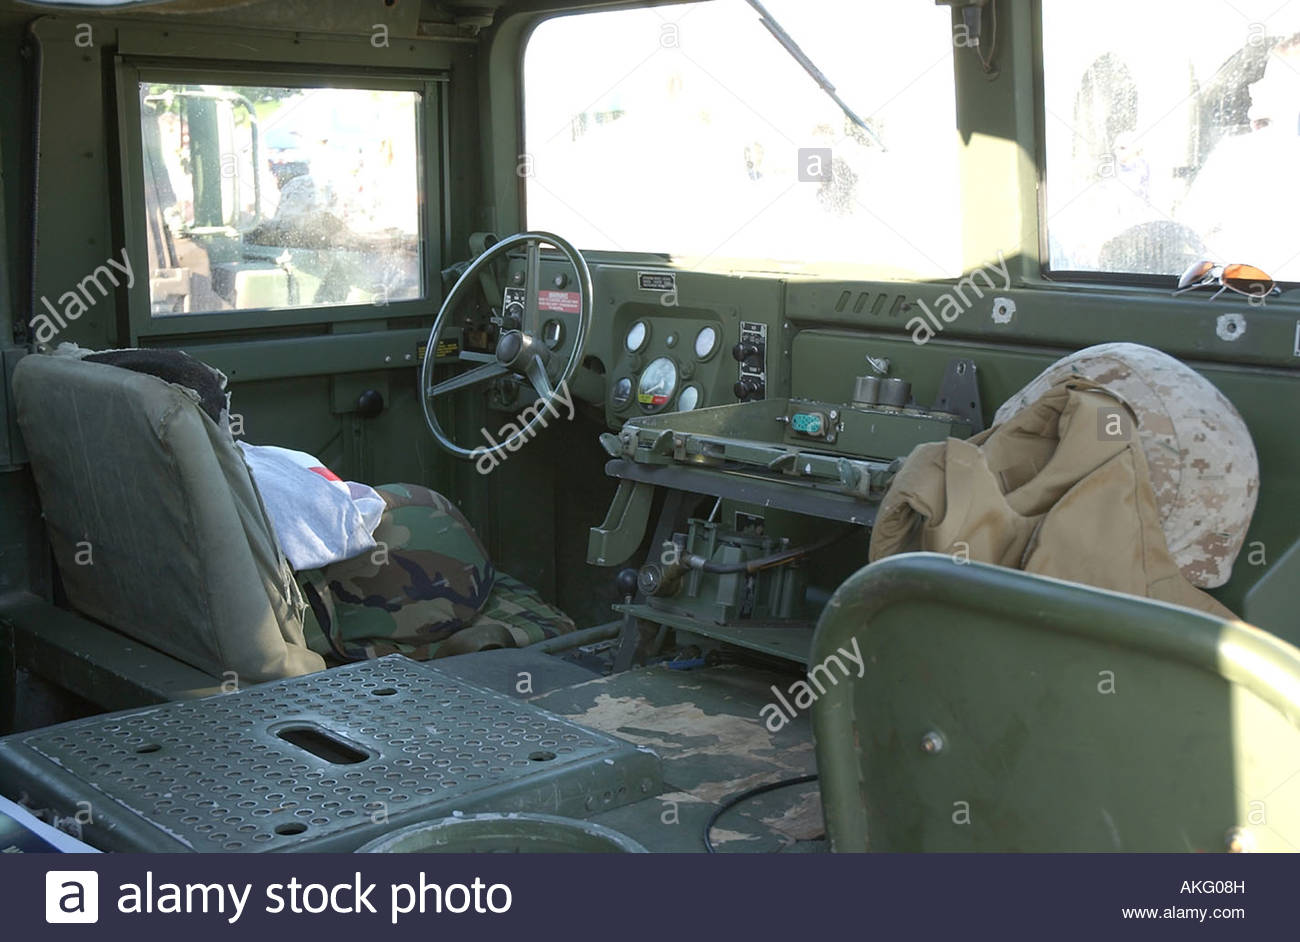 Interior Of A Military Vehicle Stock Photo 14990176 Alamy